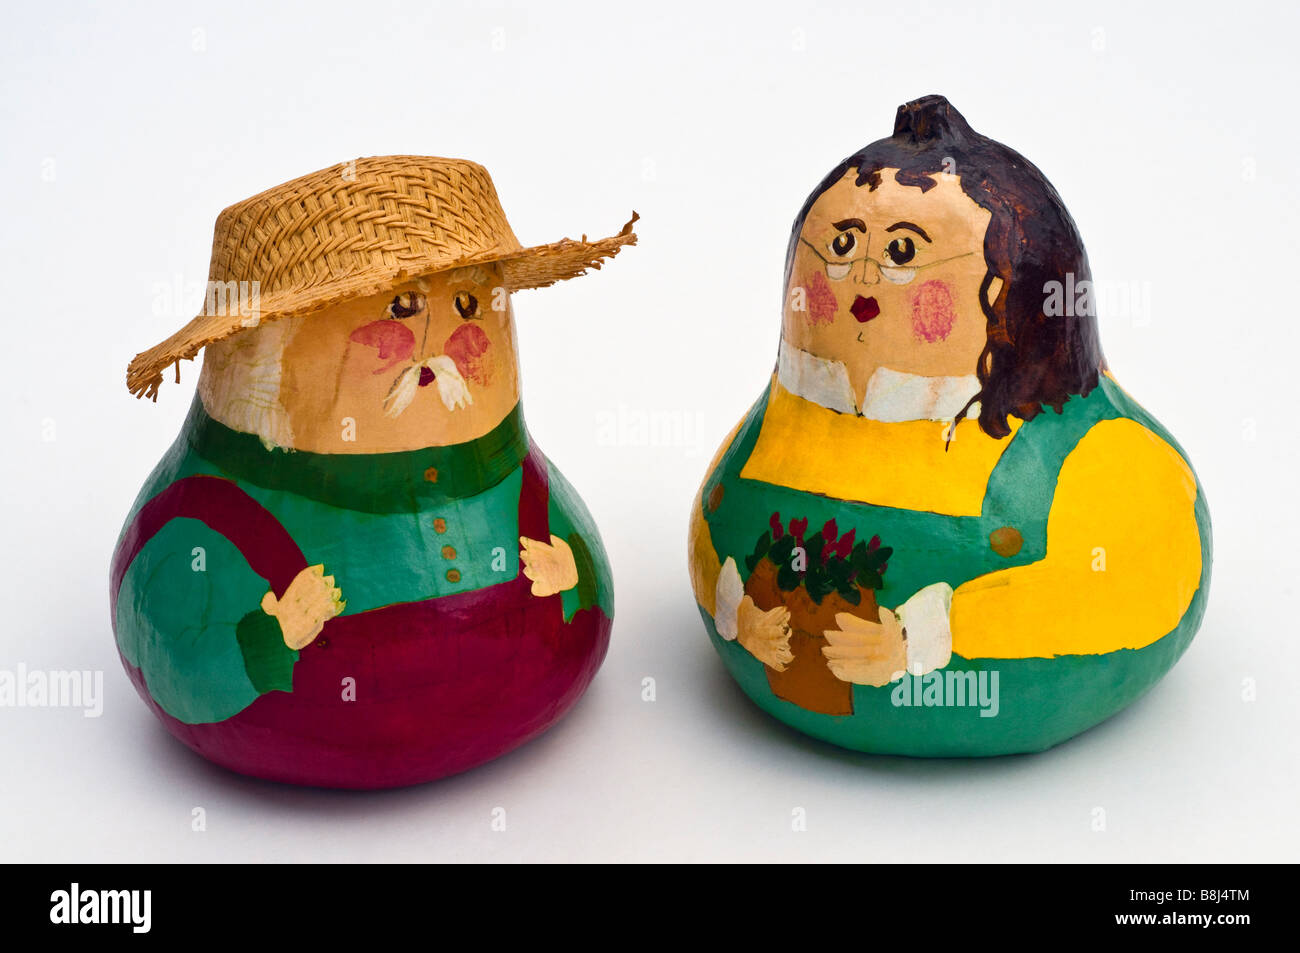 Man and woman model figures made from painted vegetable gourds - American. Stock Photo